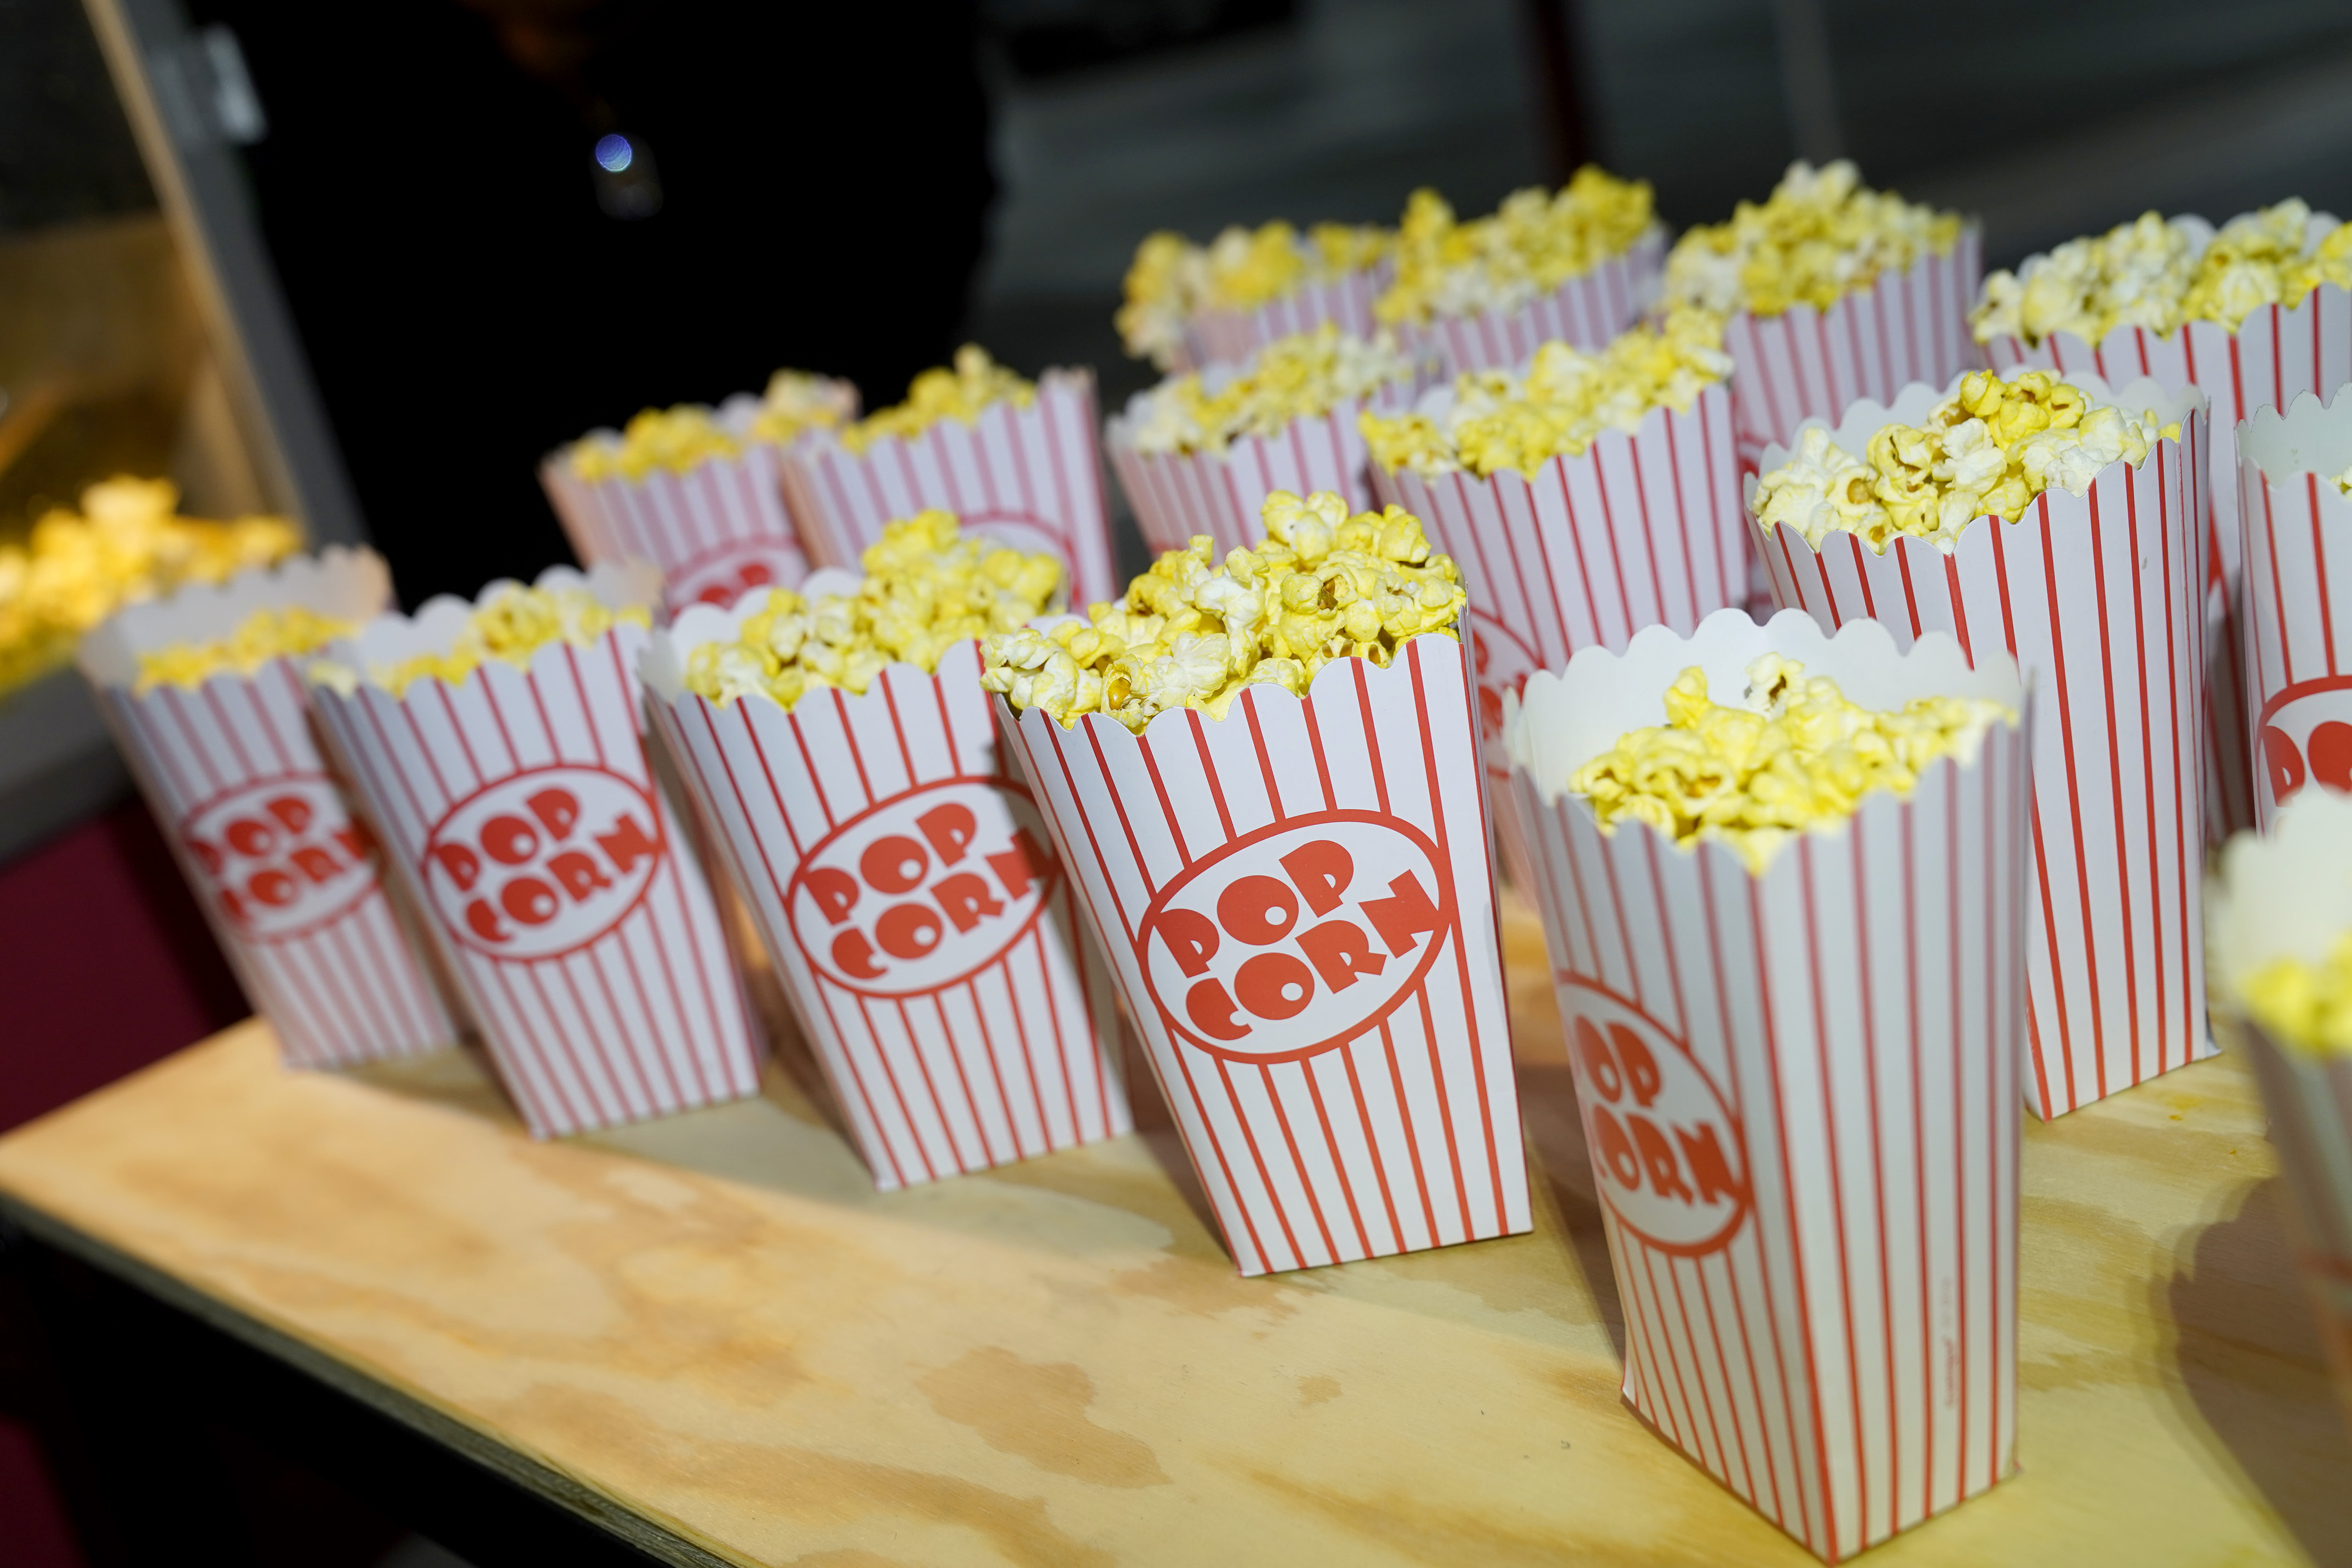 LOS ANGELES, CALIFORNIA - NOVEMBER 21: Popcorn on display during the fourth annual Volkswagen Drive...